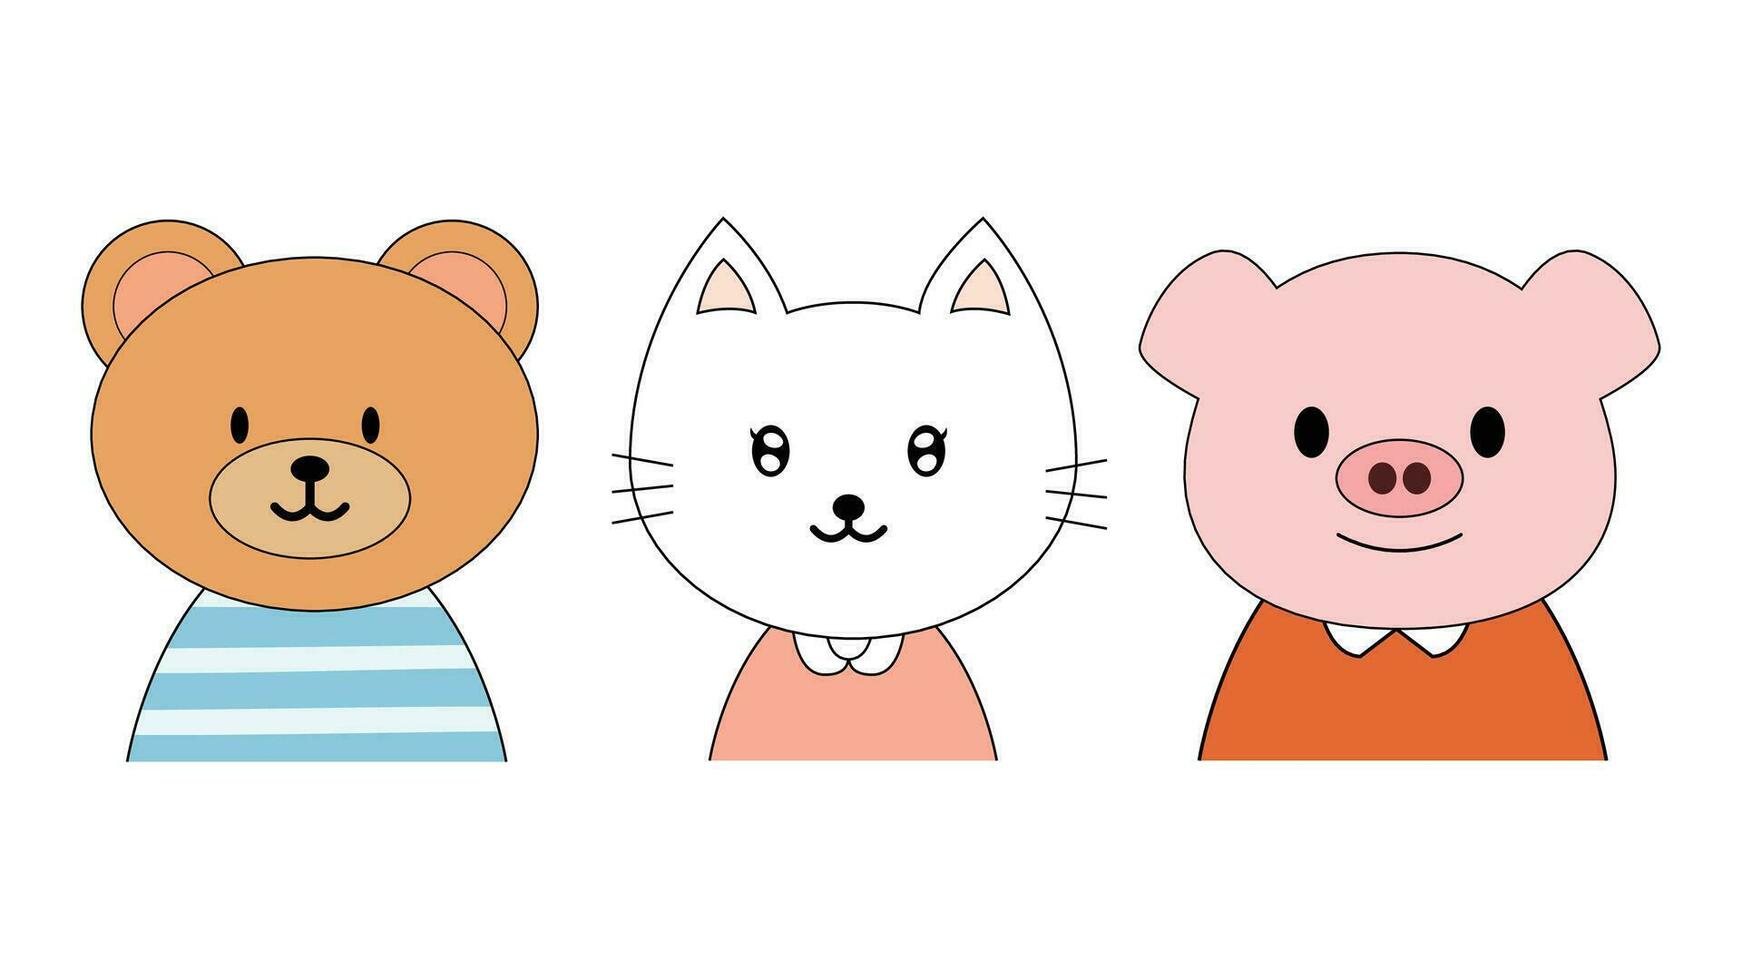 Cute animals bear, pig, dog, cat, fog and deer for icon, avatar, icon, kids, element and illustration vector